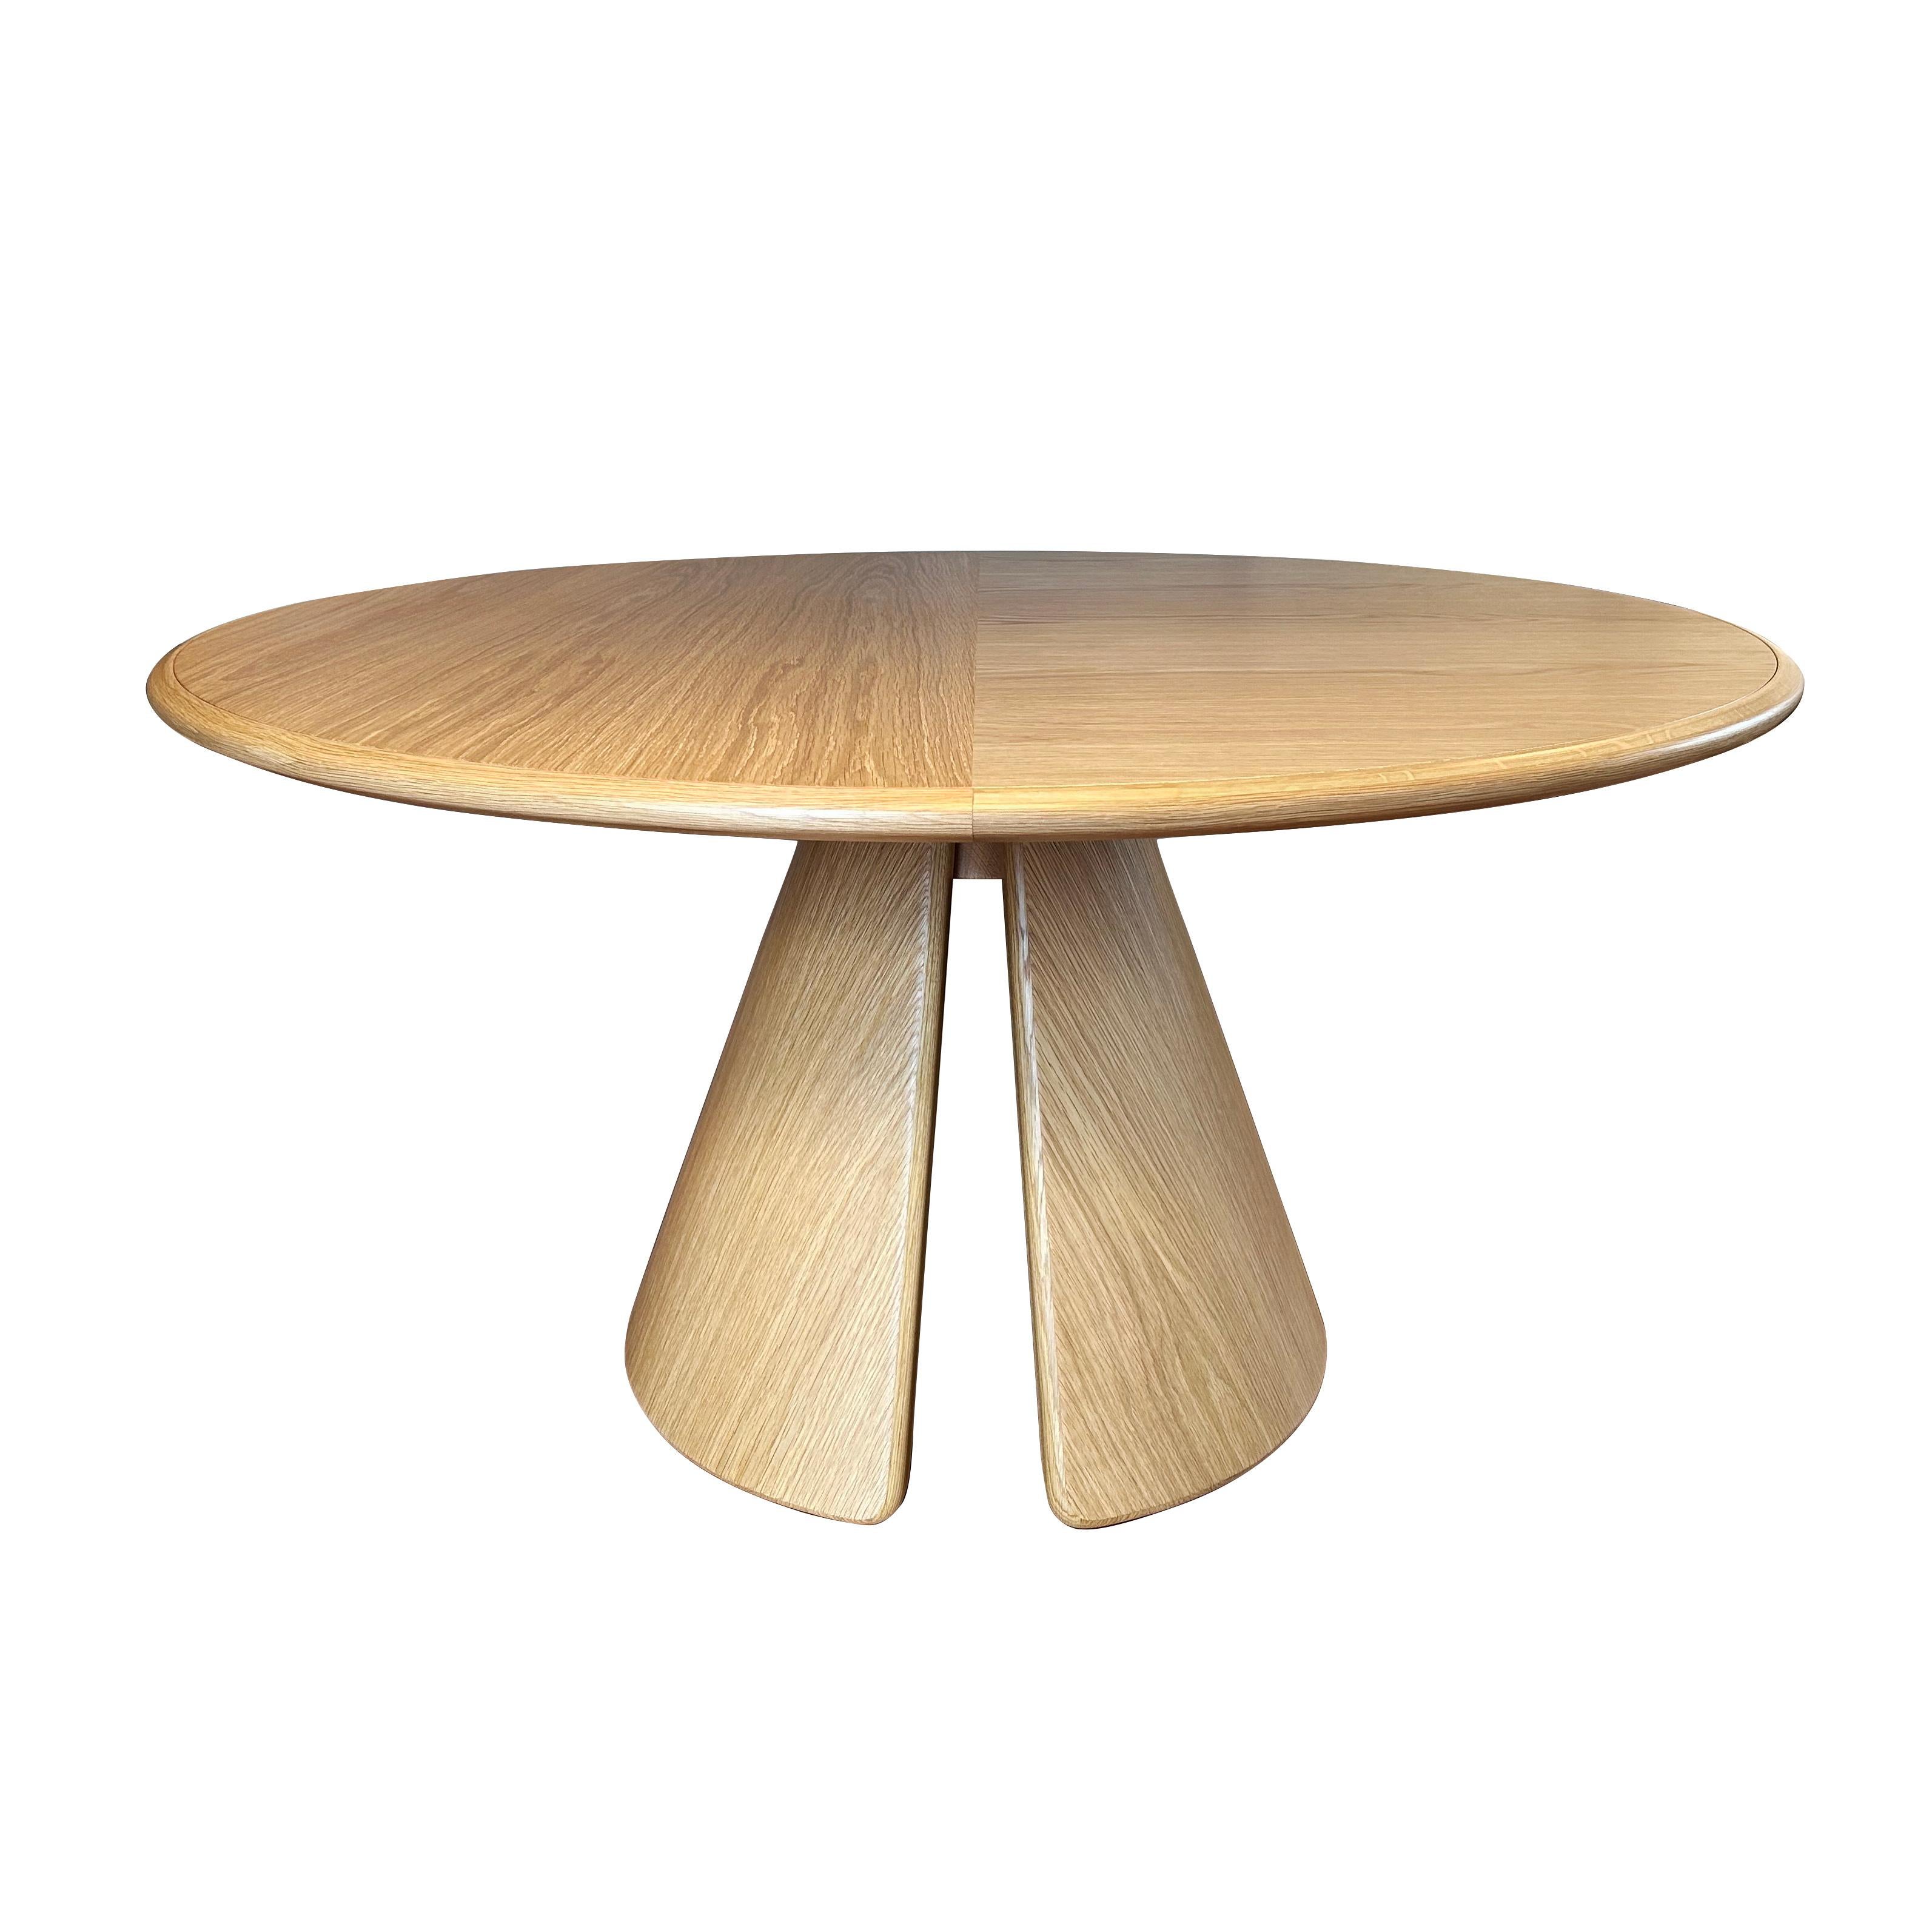 Turkish Sama Dining Table, Contemporary Sculptural Round Oak by Fulden Topaloglu For Sale